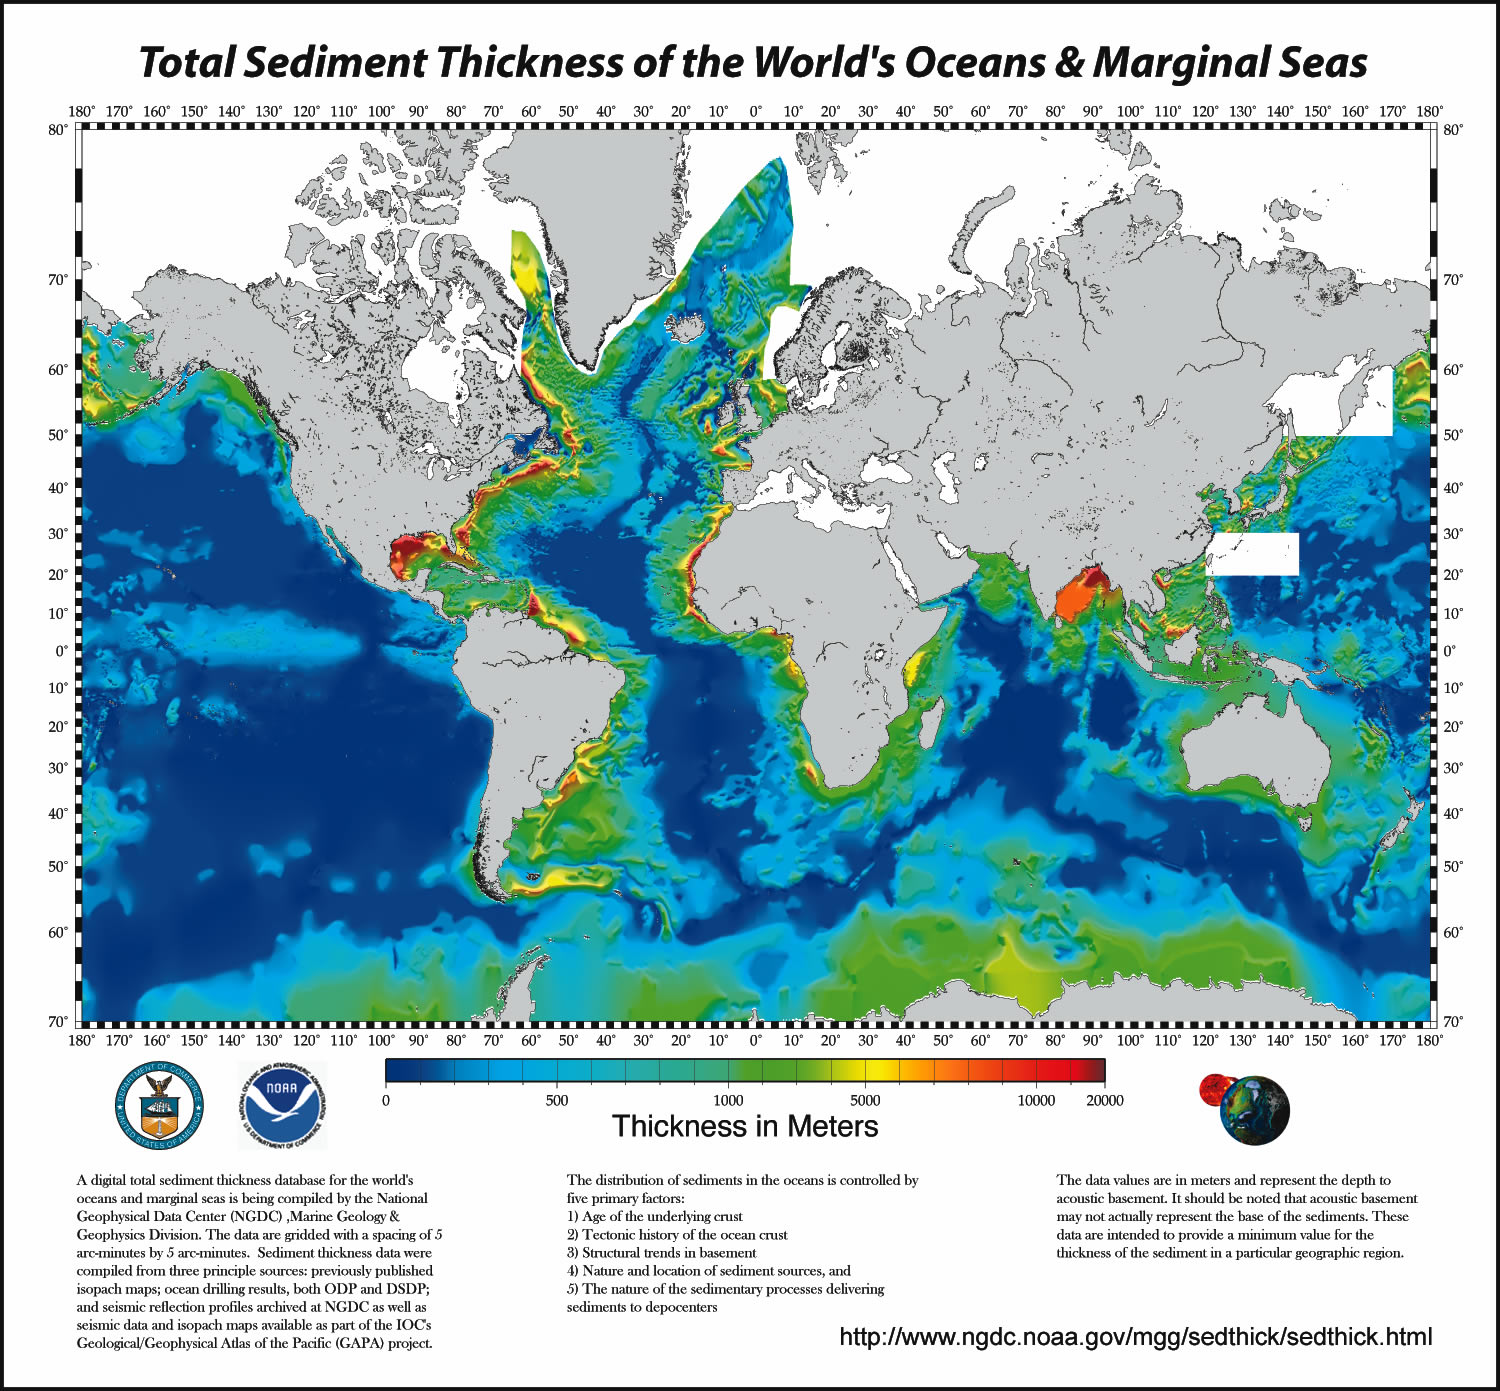 Figure shows total sediment thicknessin the oceans and seas relative to continents and oceans. Sediment thickness is greater along passive margins where no subduction occurs and least thick in the midst of ocean basins.